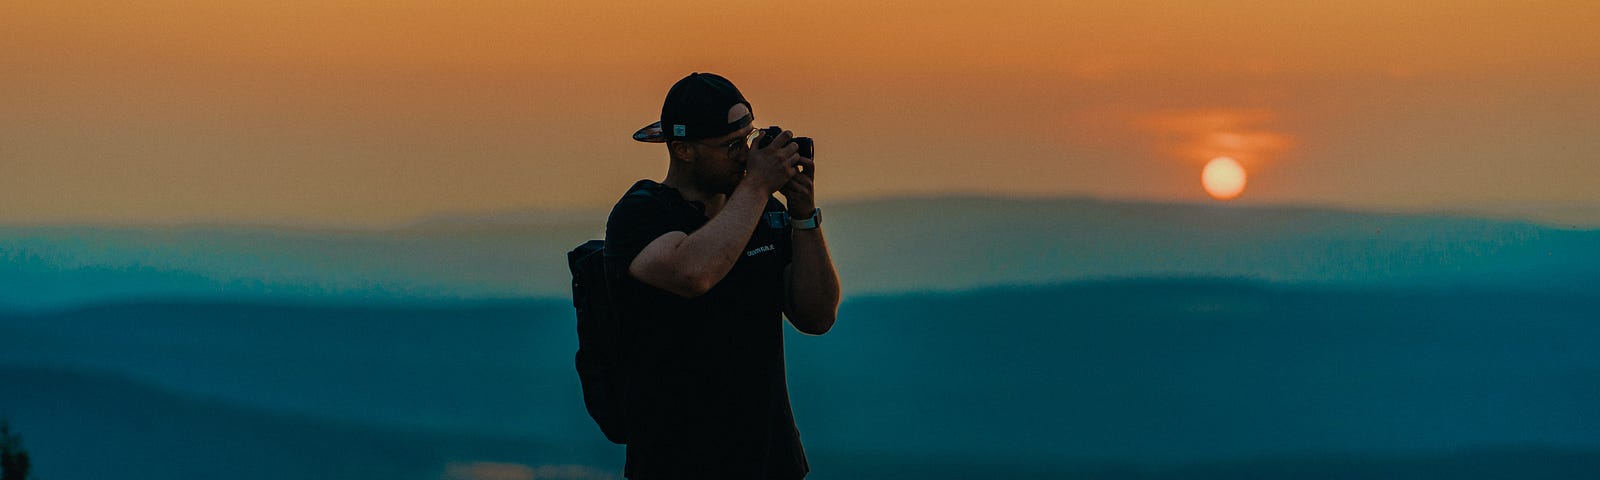 The sunset on the background. A man holds a camera to catch the moment.